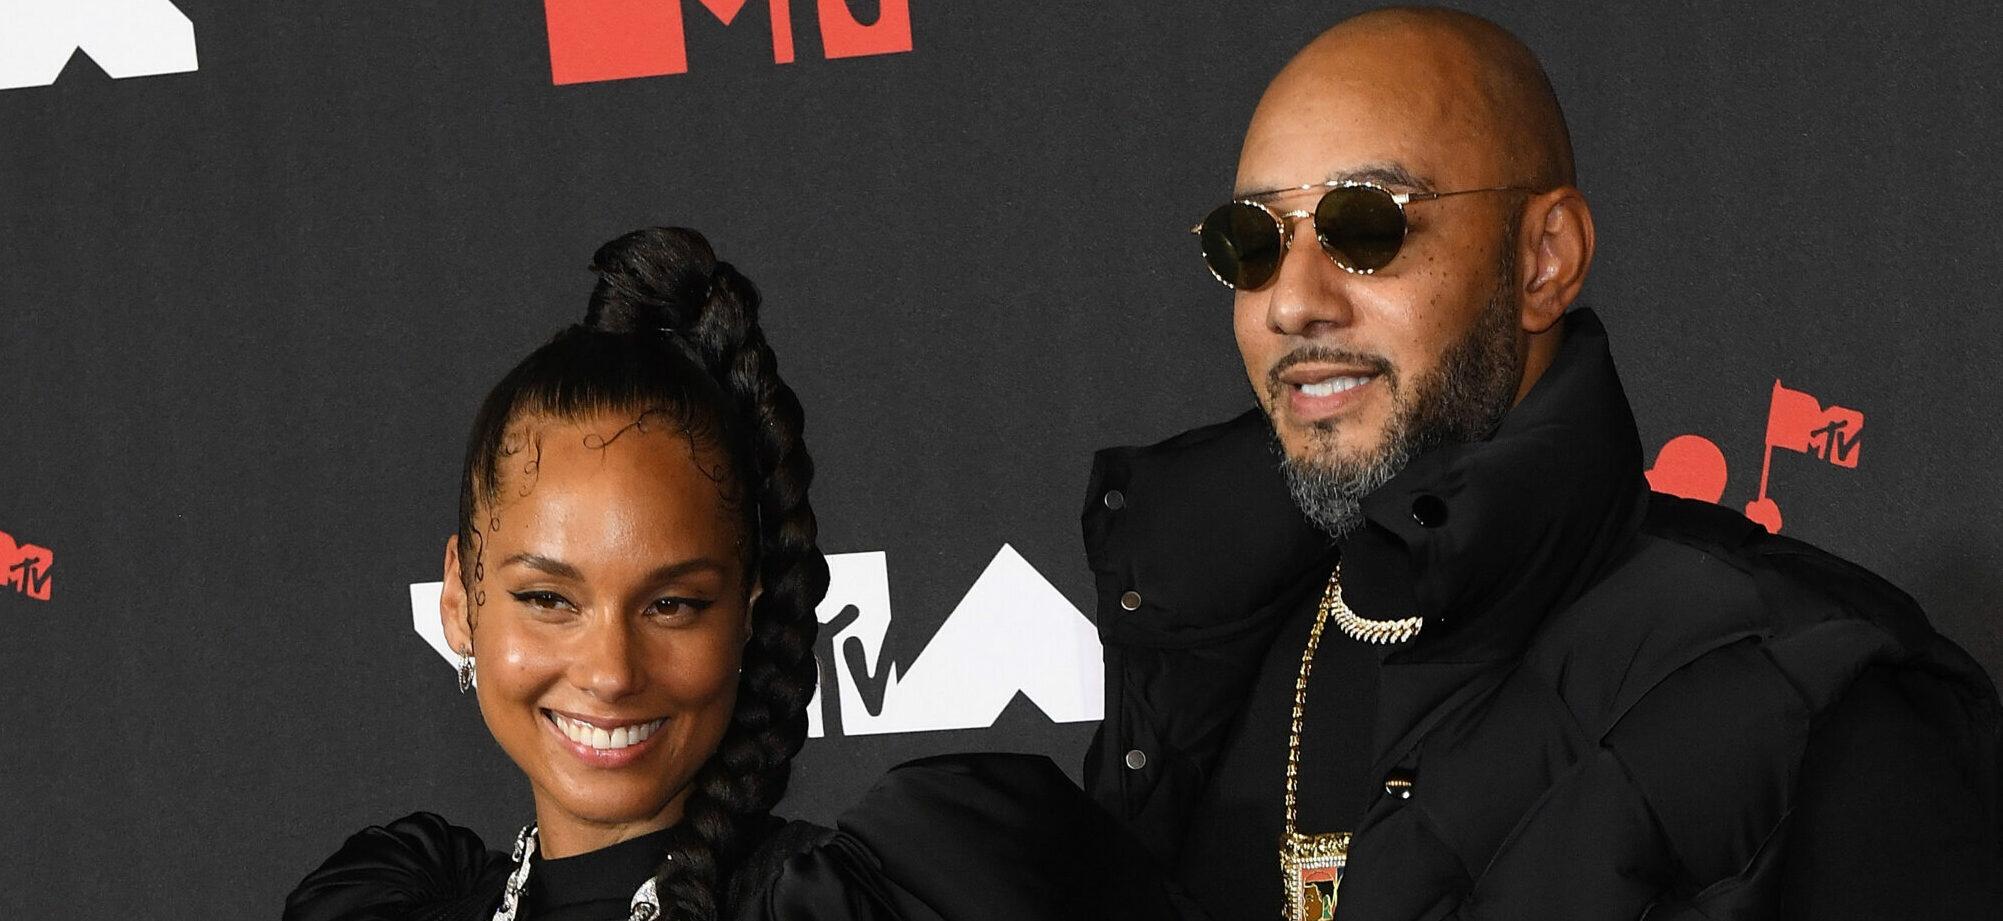 Alicia Keys Serenades Husband Swizz Beatz On His 45th Birthday: ‘Forever By Your Side’